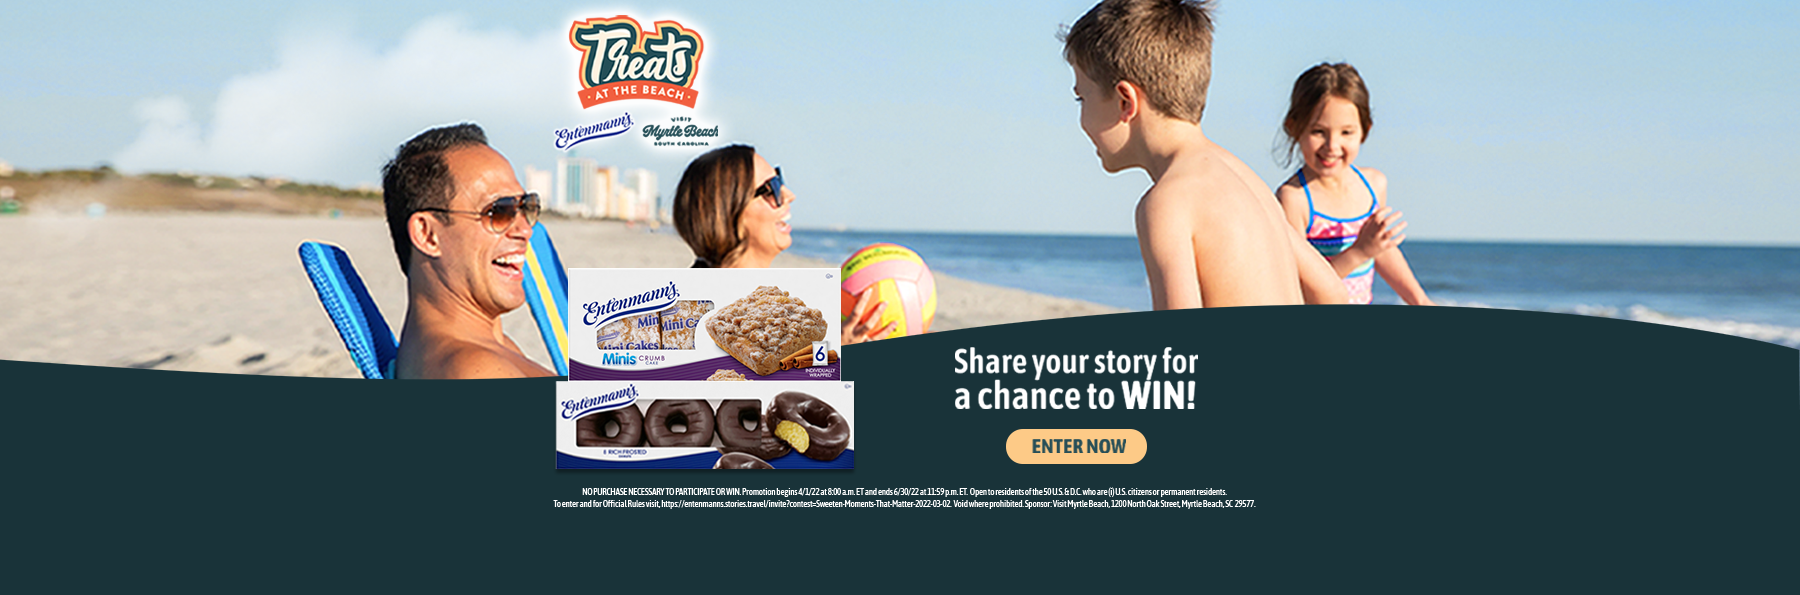 Treats at the beach. Share your story for a chance to win! Enter Now